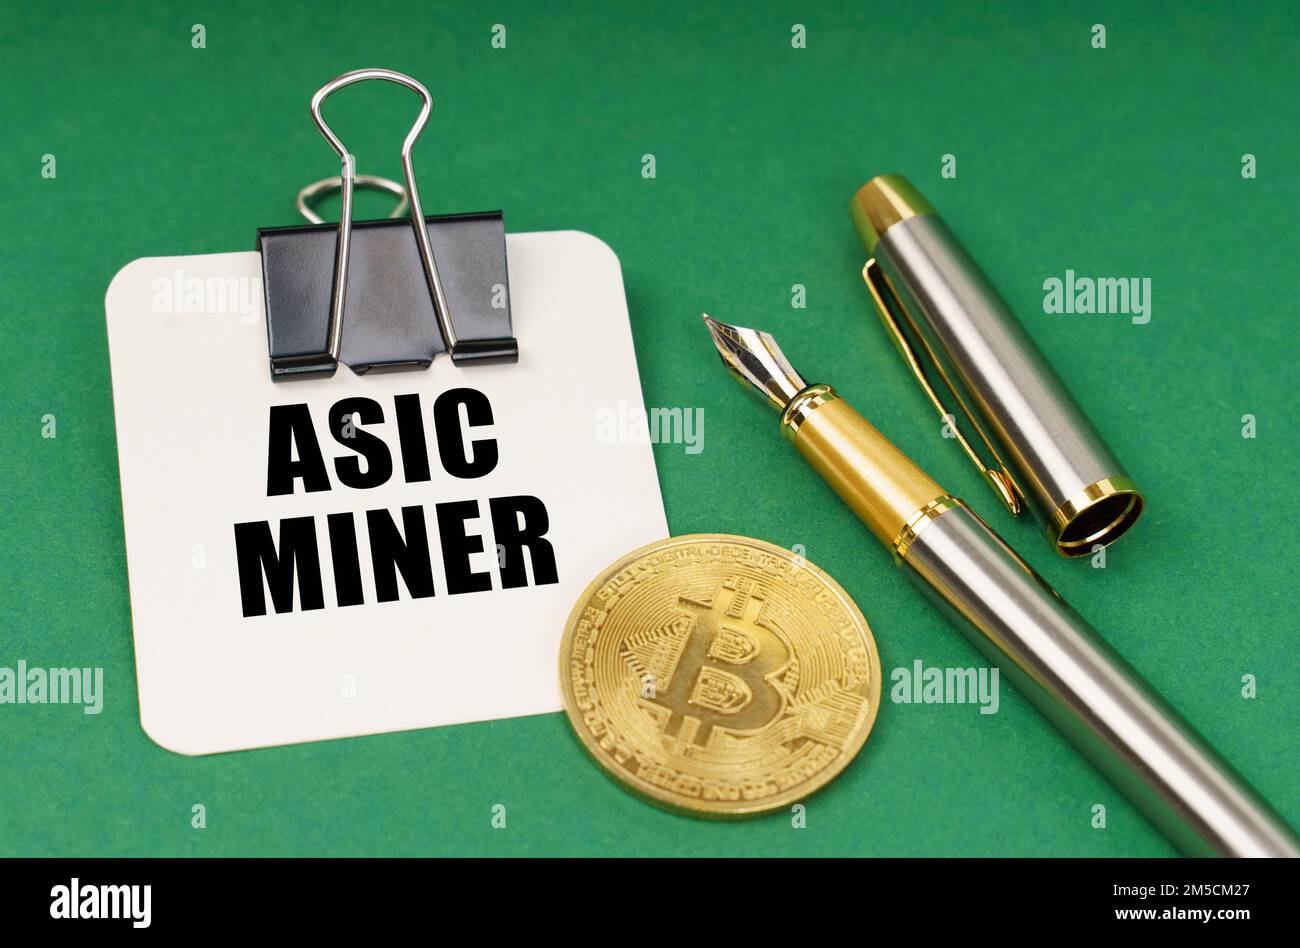 Cryptocurrency and business concept. On a green surface, a bitcoin coin, a pen and a sheet of paper with the inscription - Asic miner Stock Photo